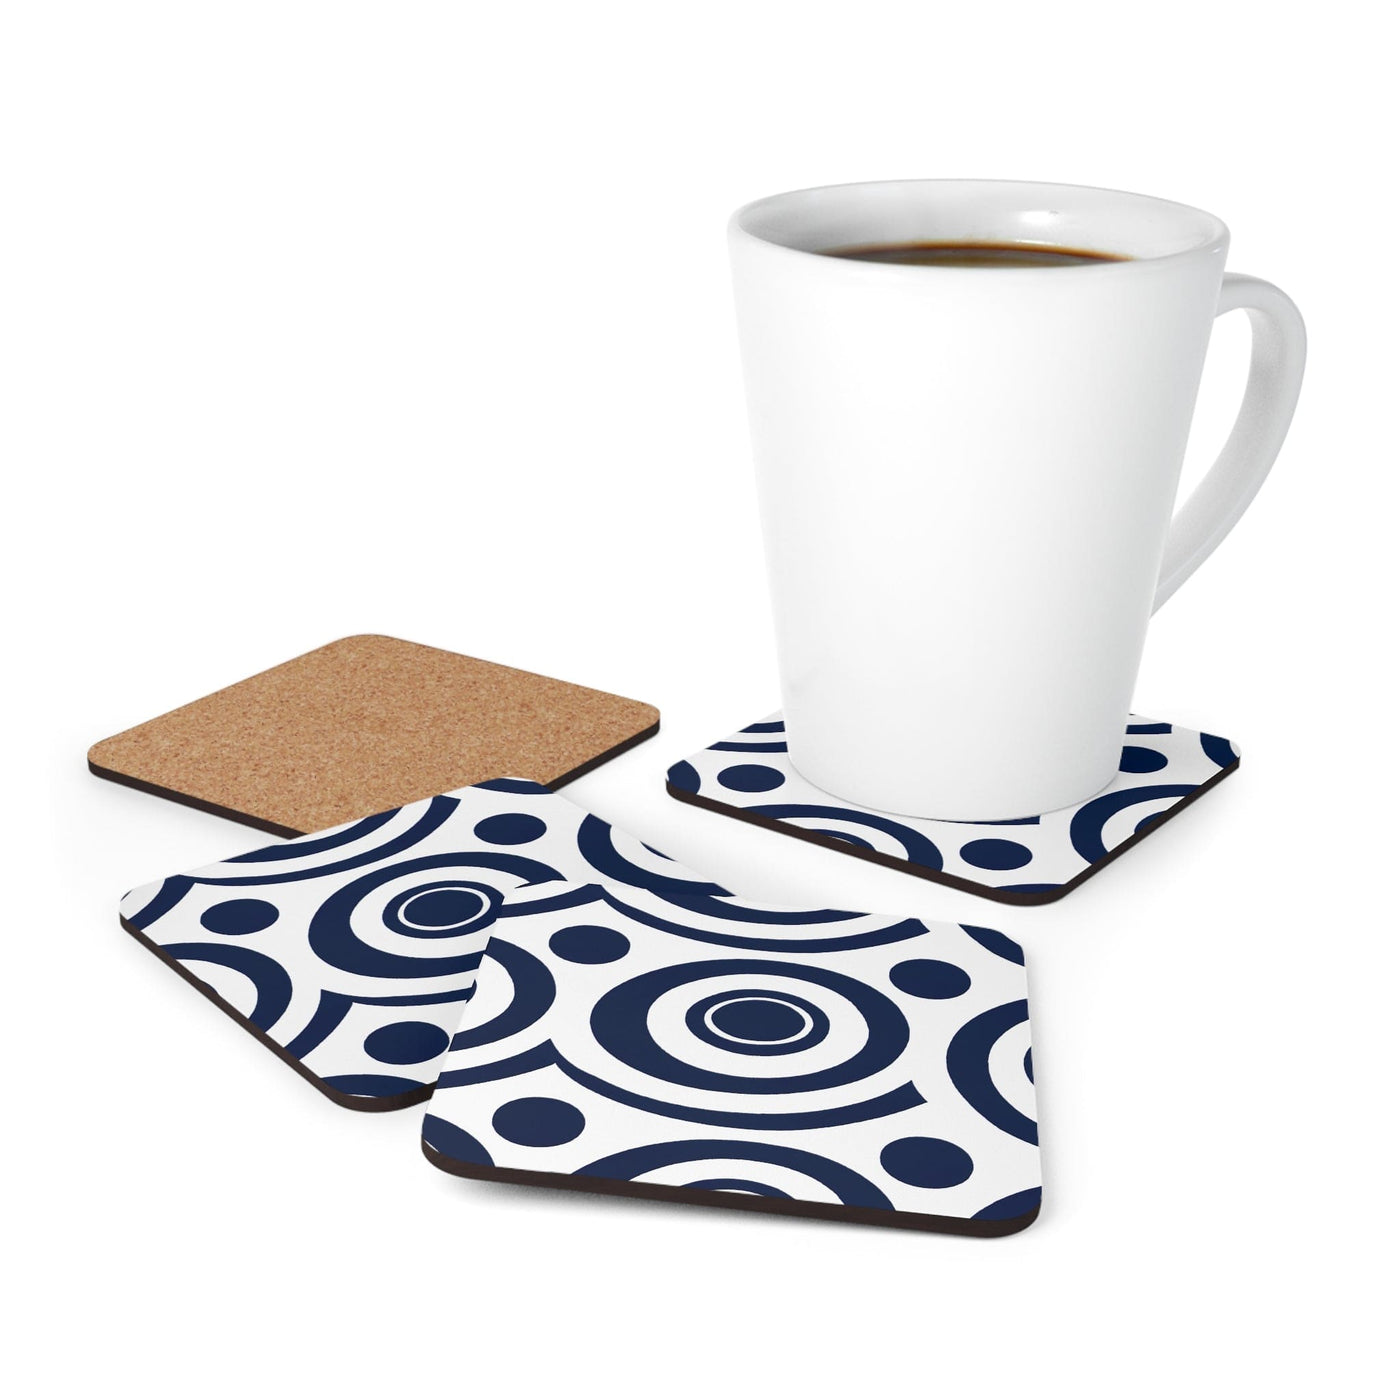 Coaster Set Of 4 For Drinks Navy Blue And White Circular Pattern - Decorative